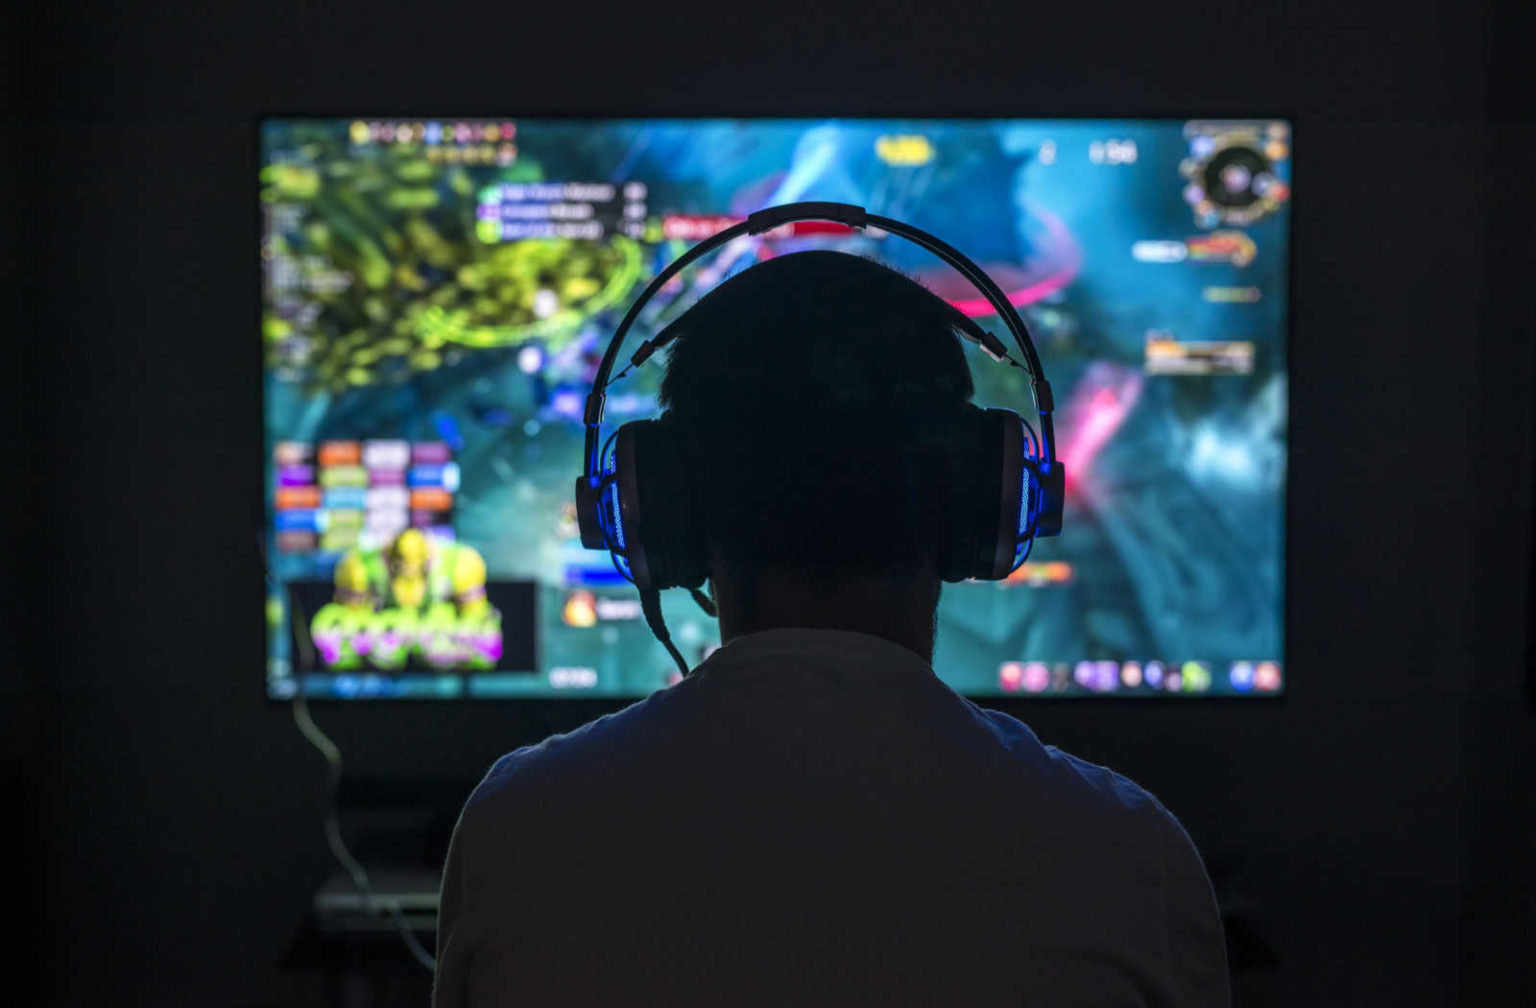 Video Gaming Injuries Are on the Rise